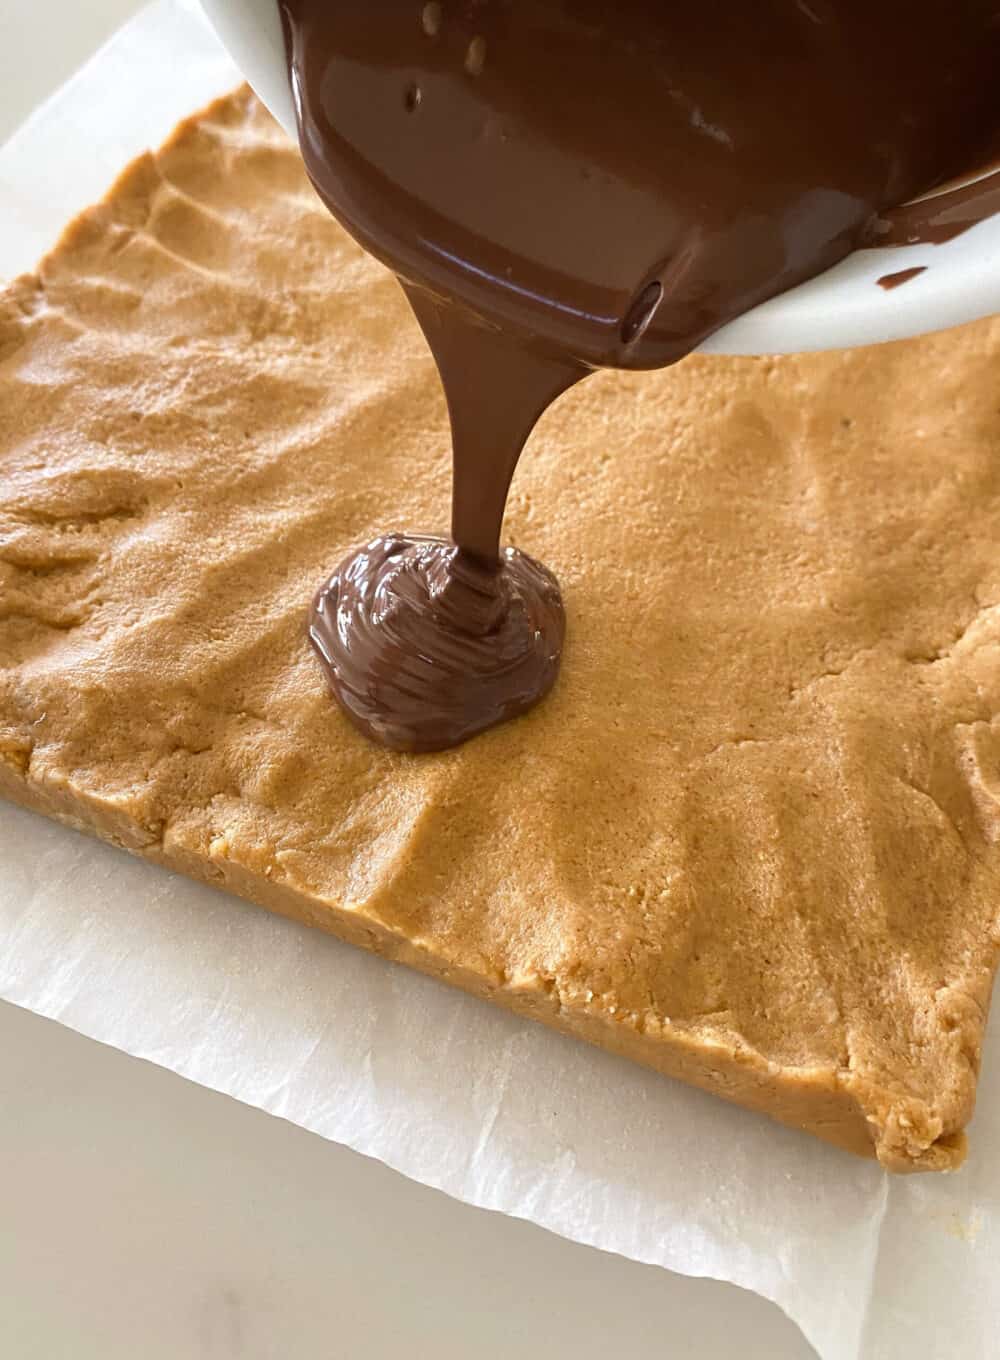 melted chocolate over peanut butter bars